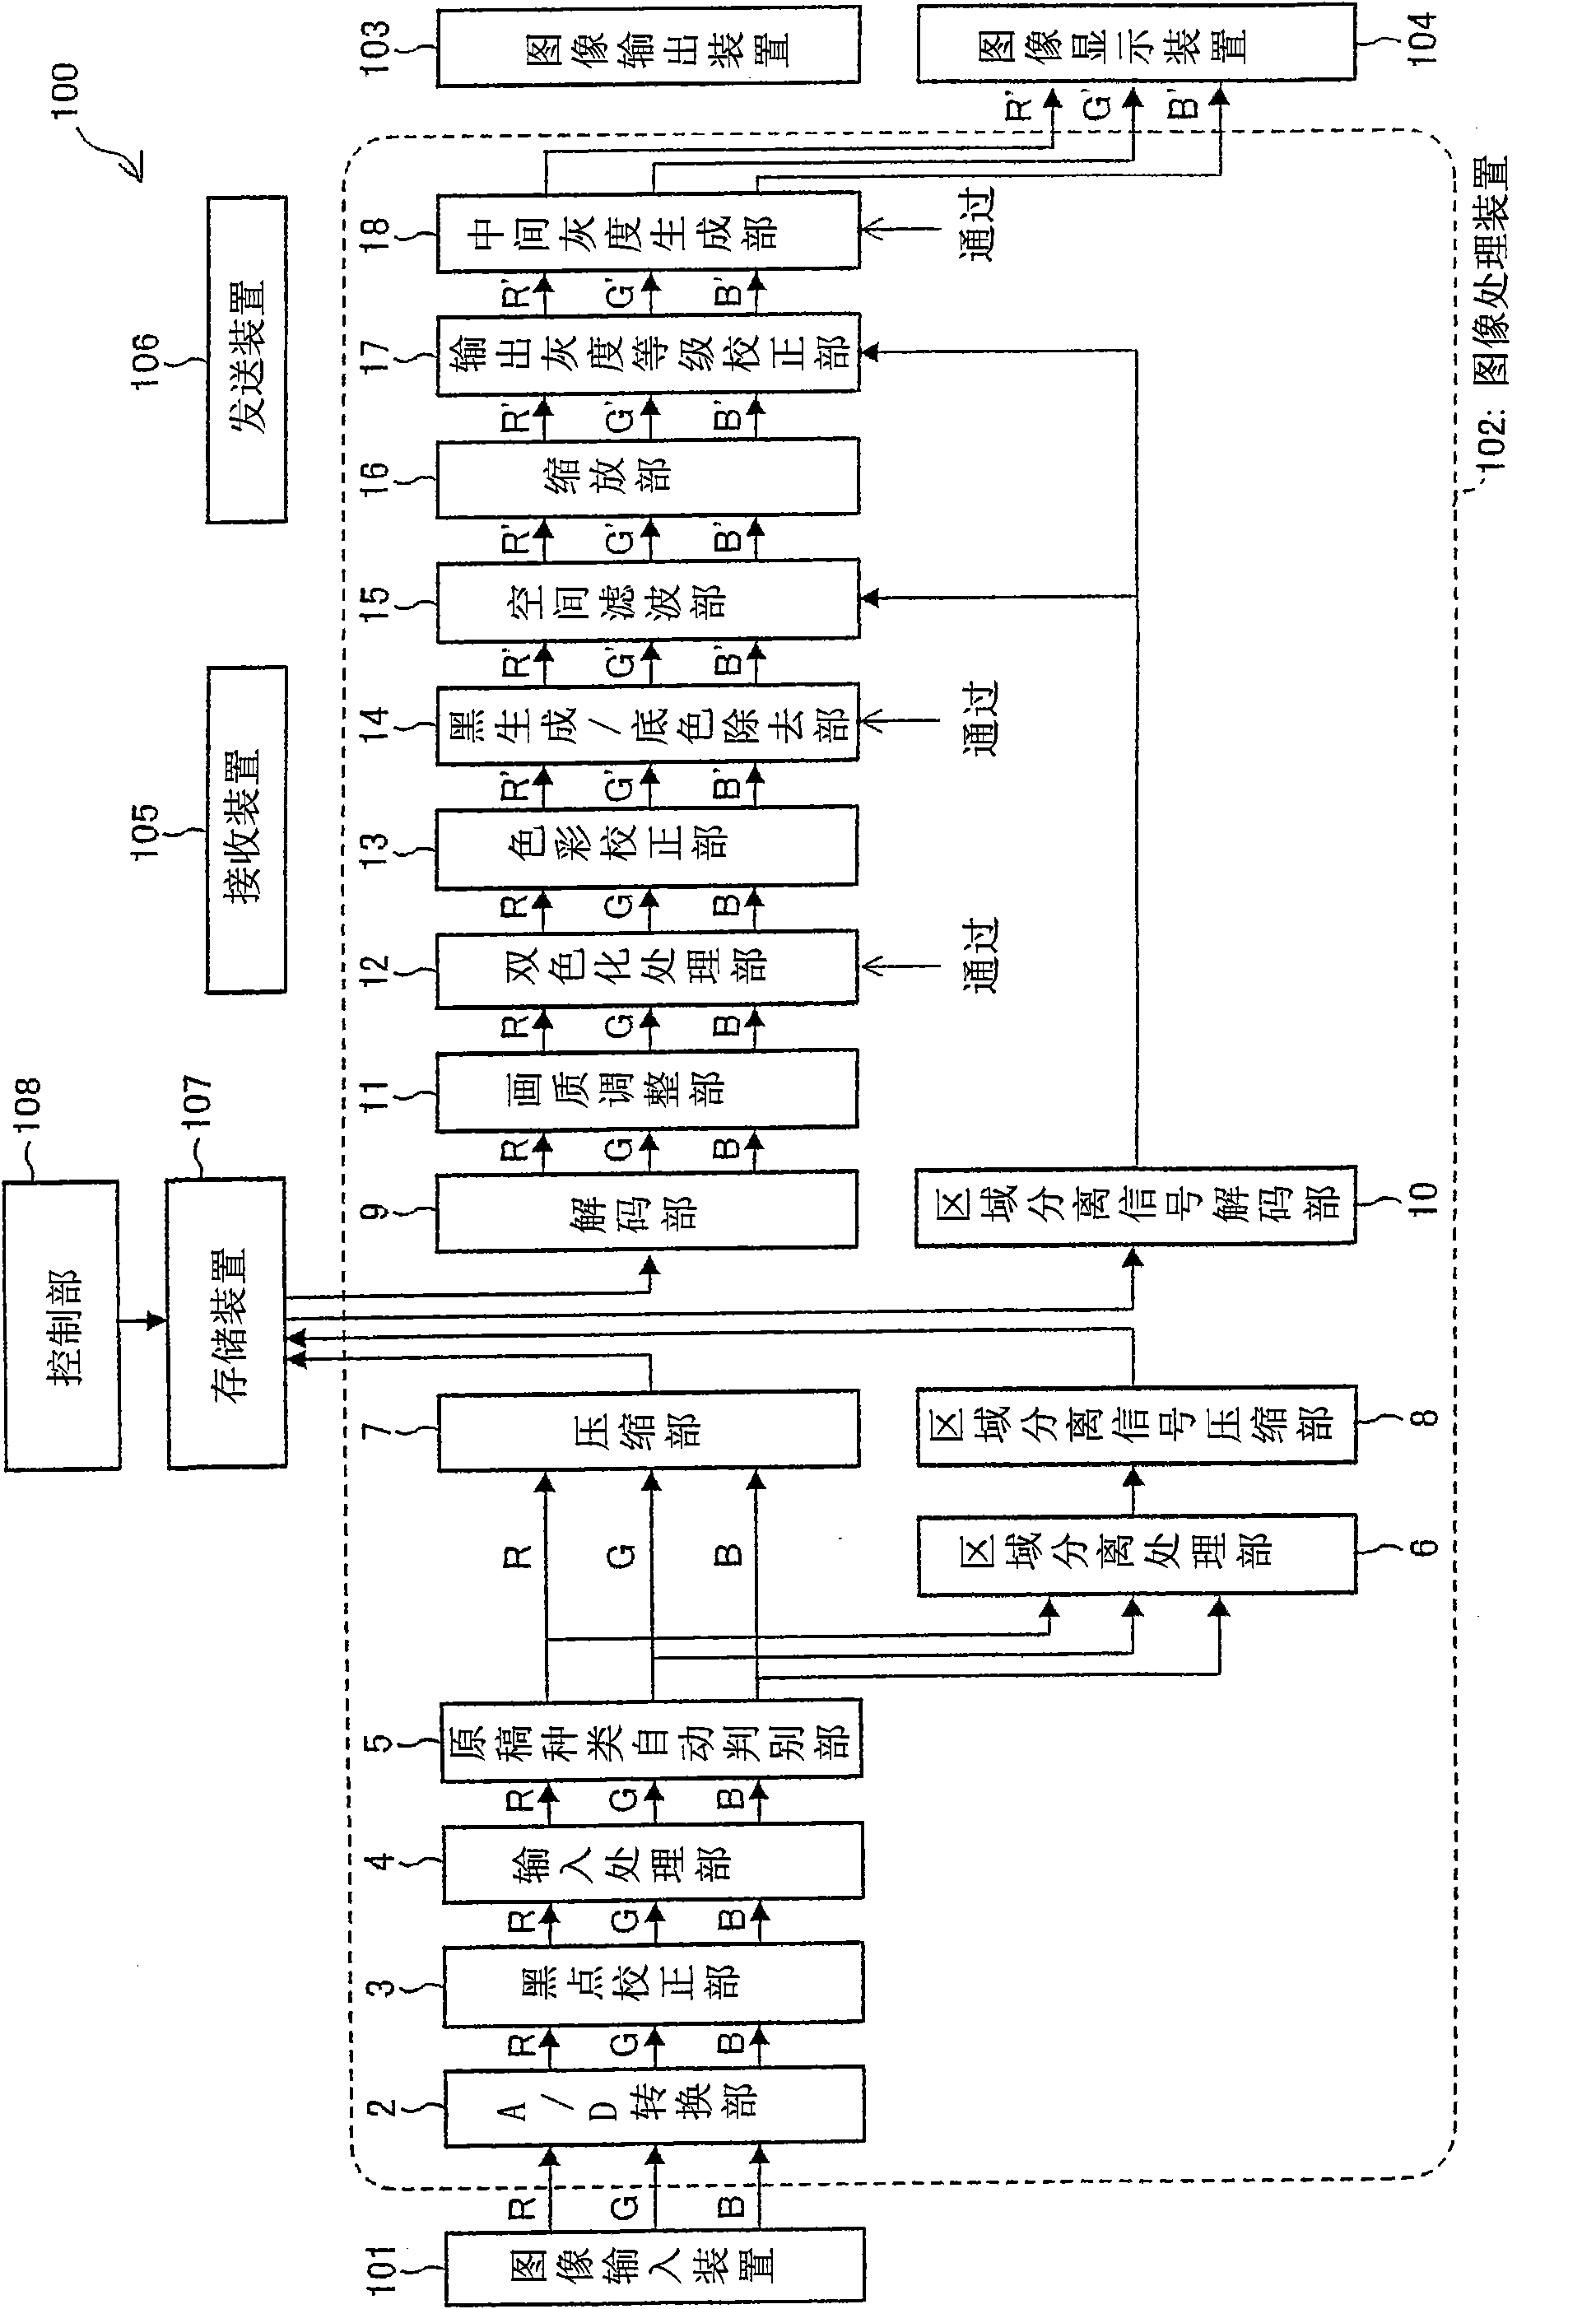 Image processing apparatus, image forming apparatus and image processing method